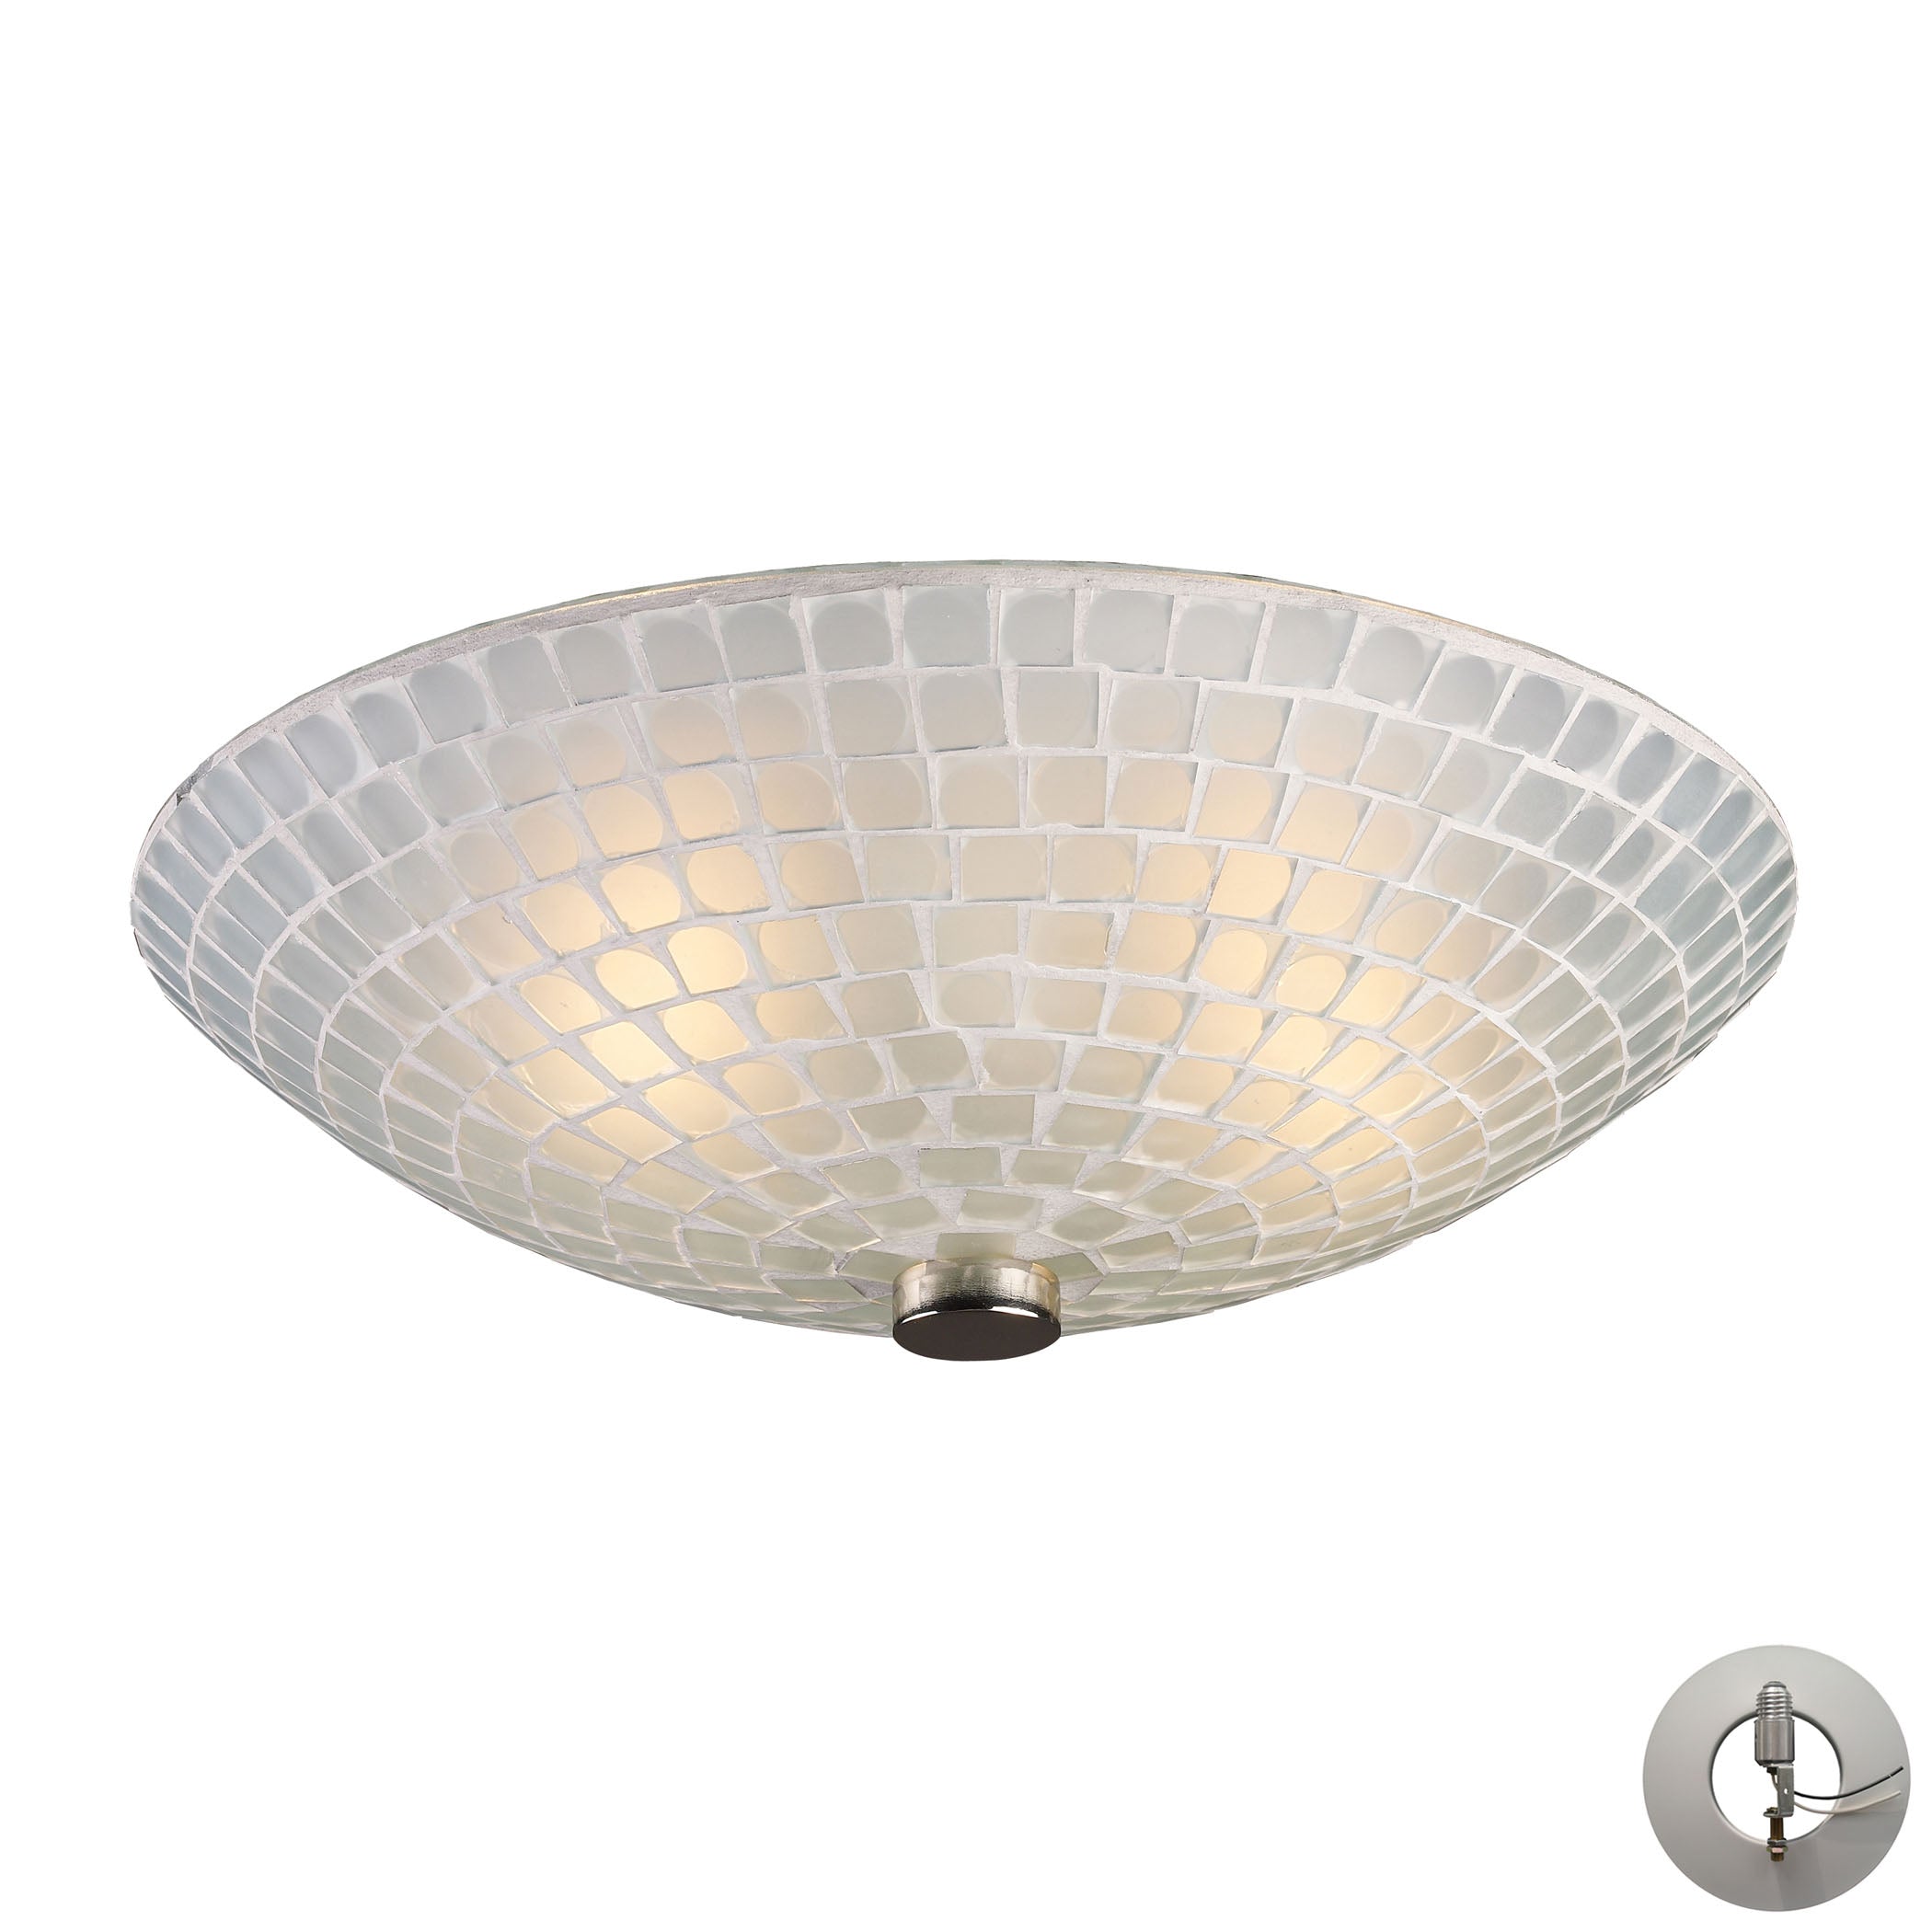 ELK Lighting 10139/2WHT-LA Fusion 2-Light Semi Flush in Satin Nickel with White Mosaic Glass - Includes Adapter Kit